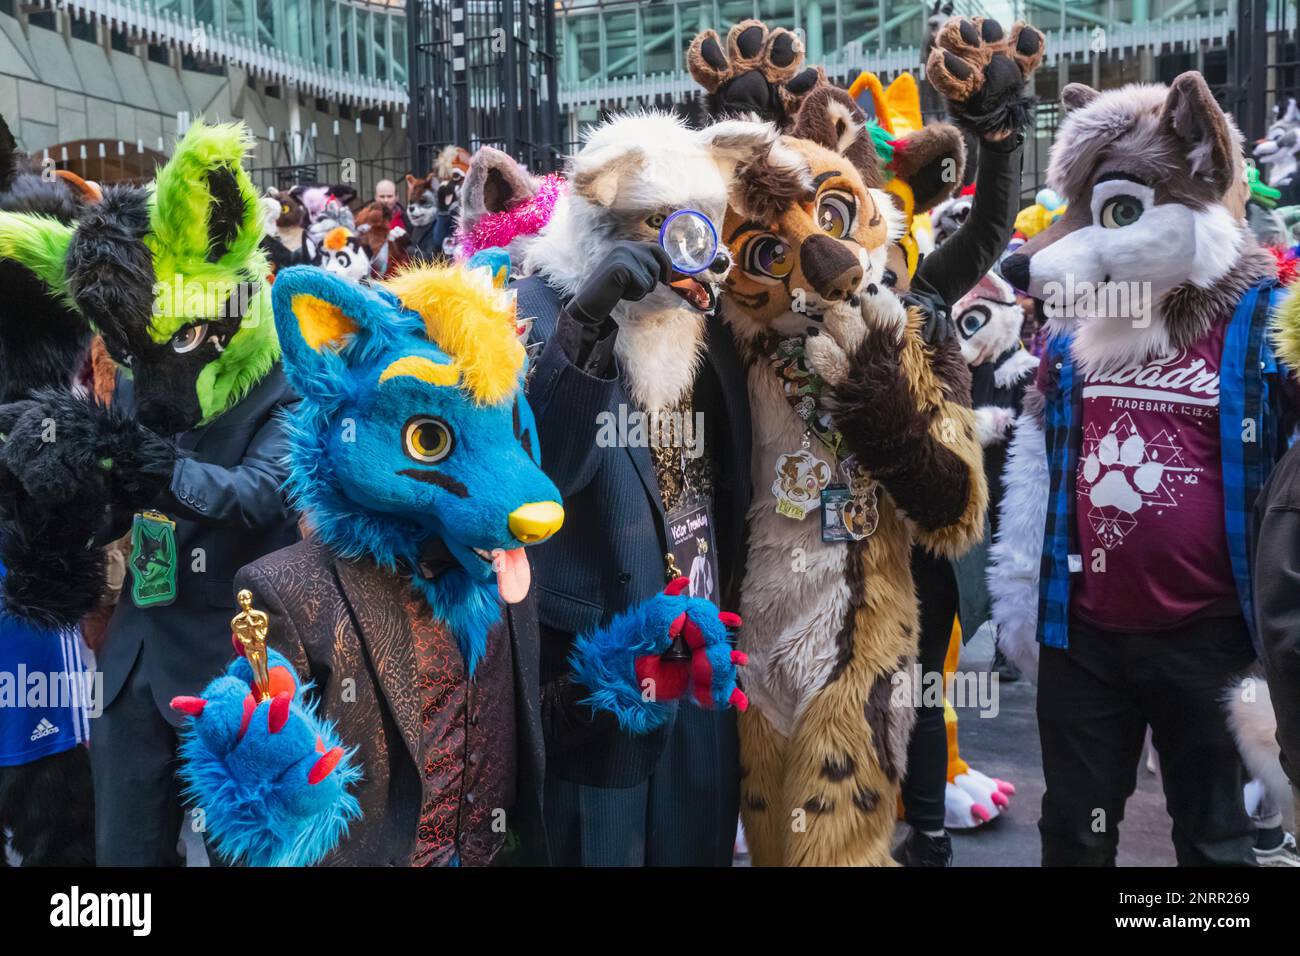 England, London, The City, Members of The London Furs Community Posing for Group Photo Stock Photo